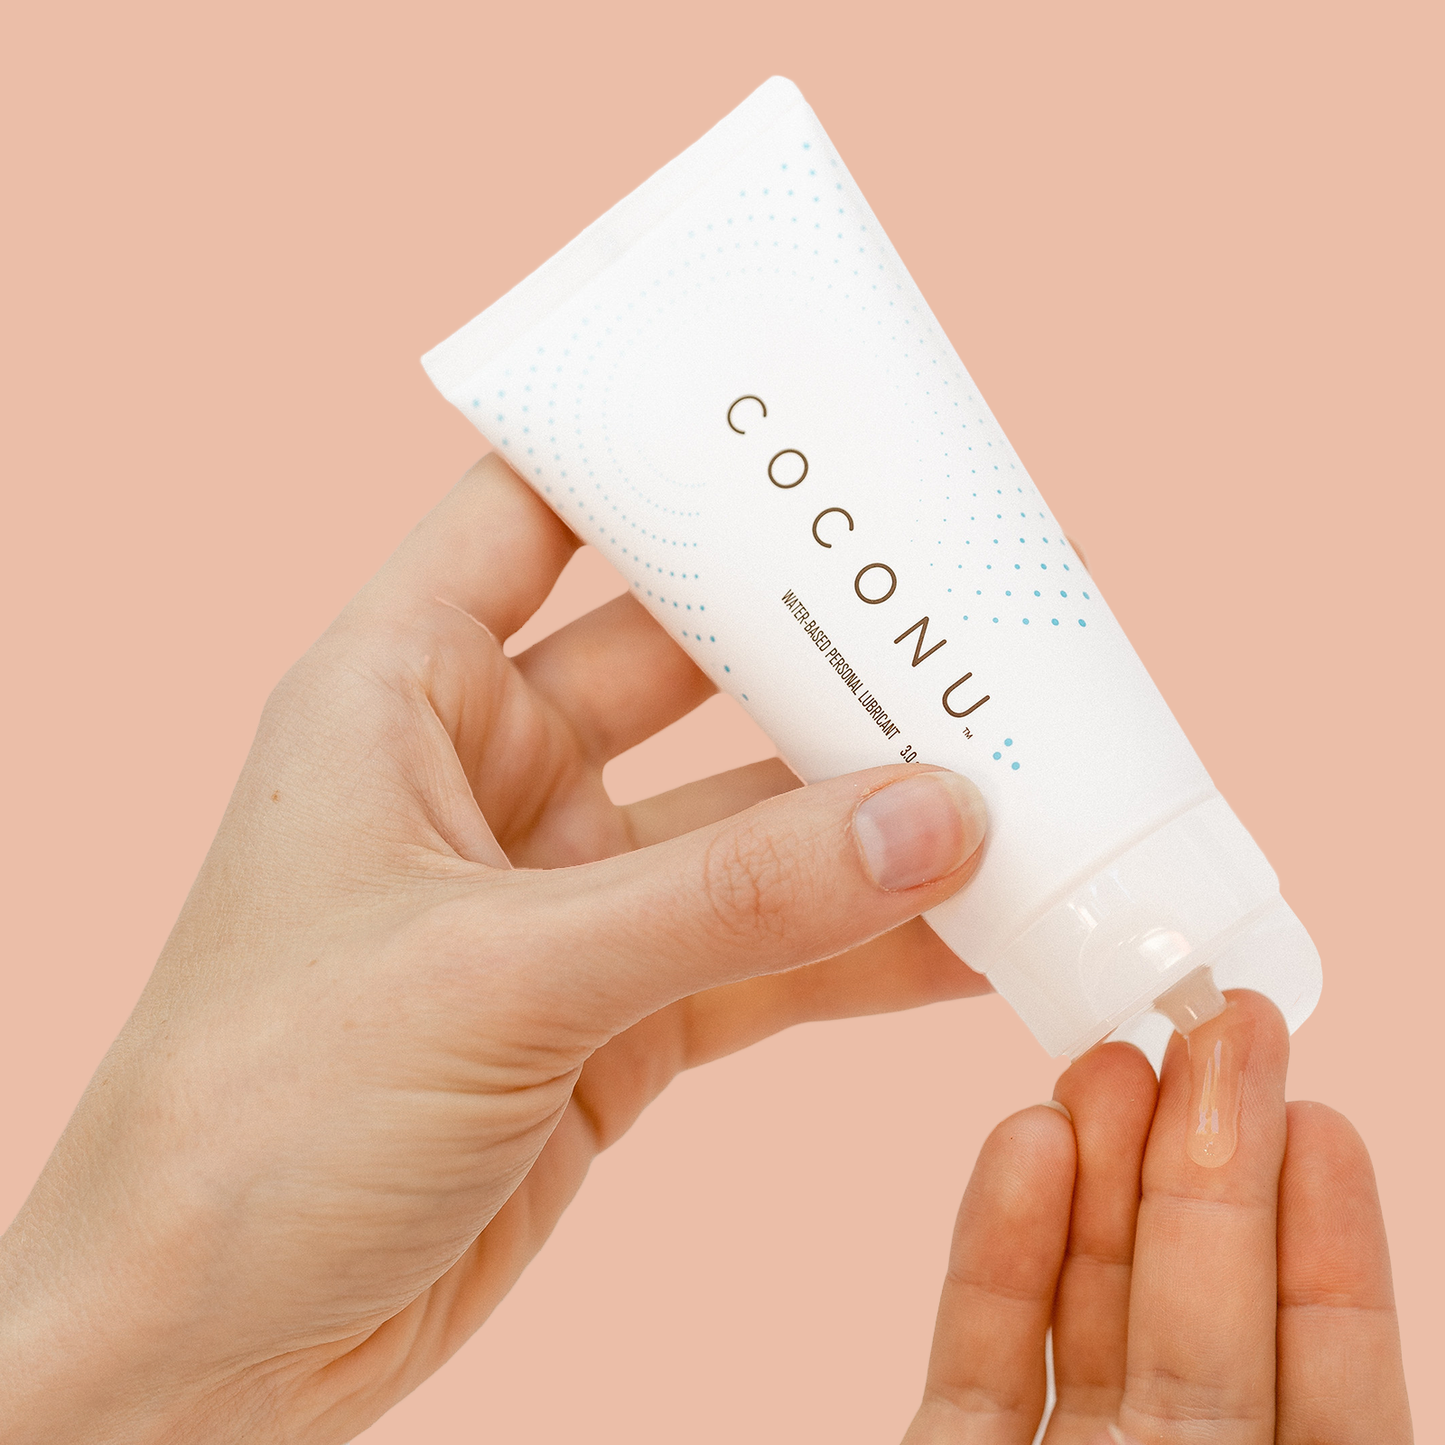 Coconu lubricant on hand